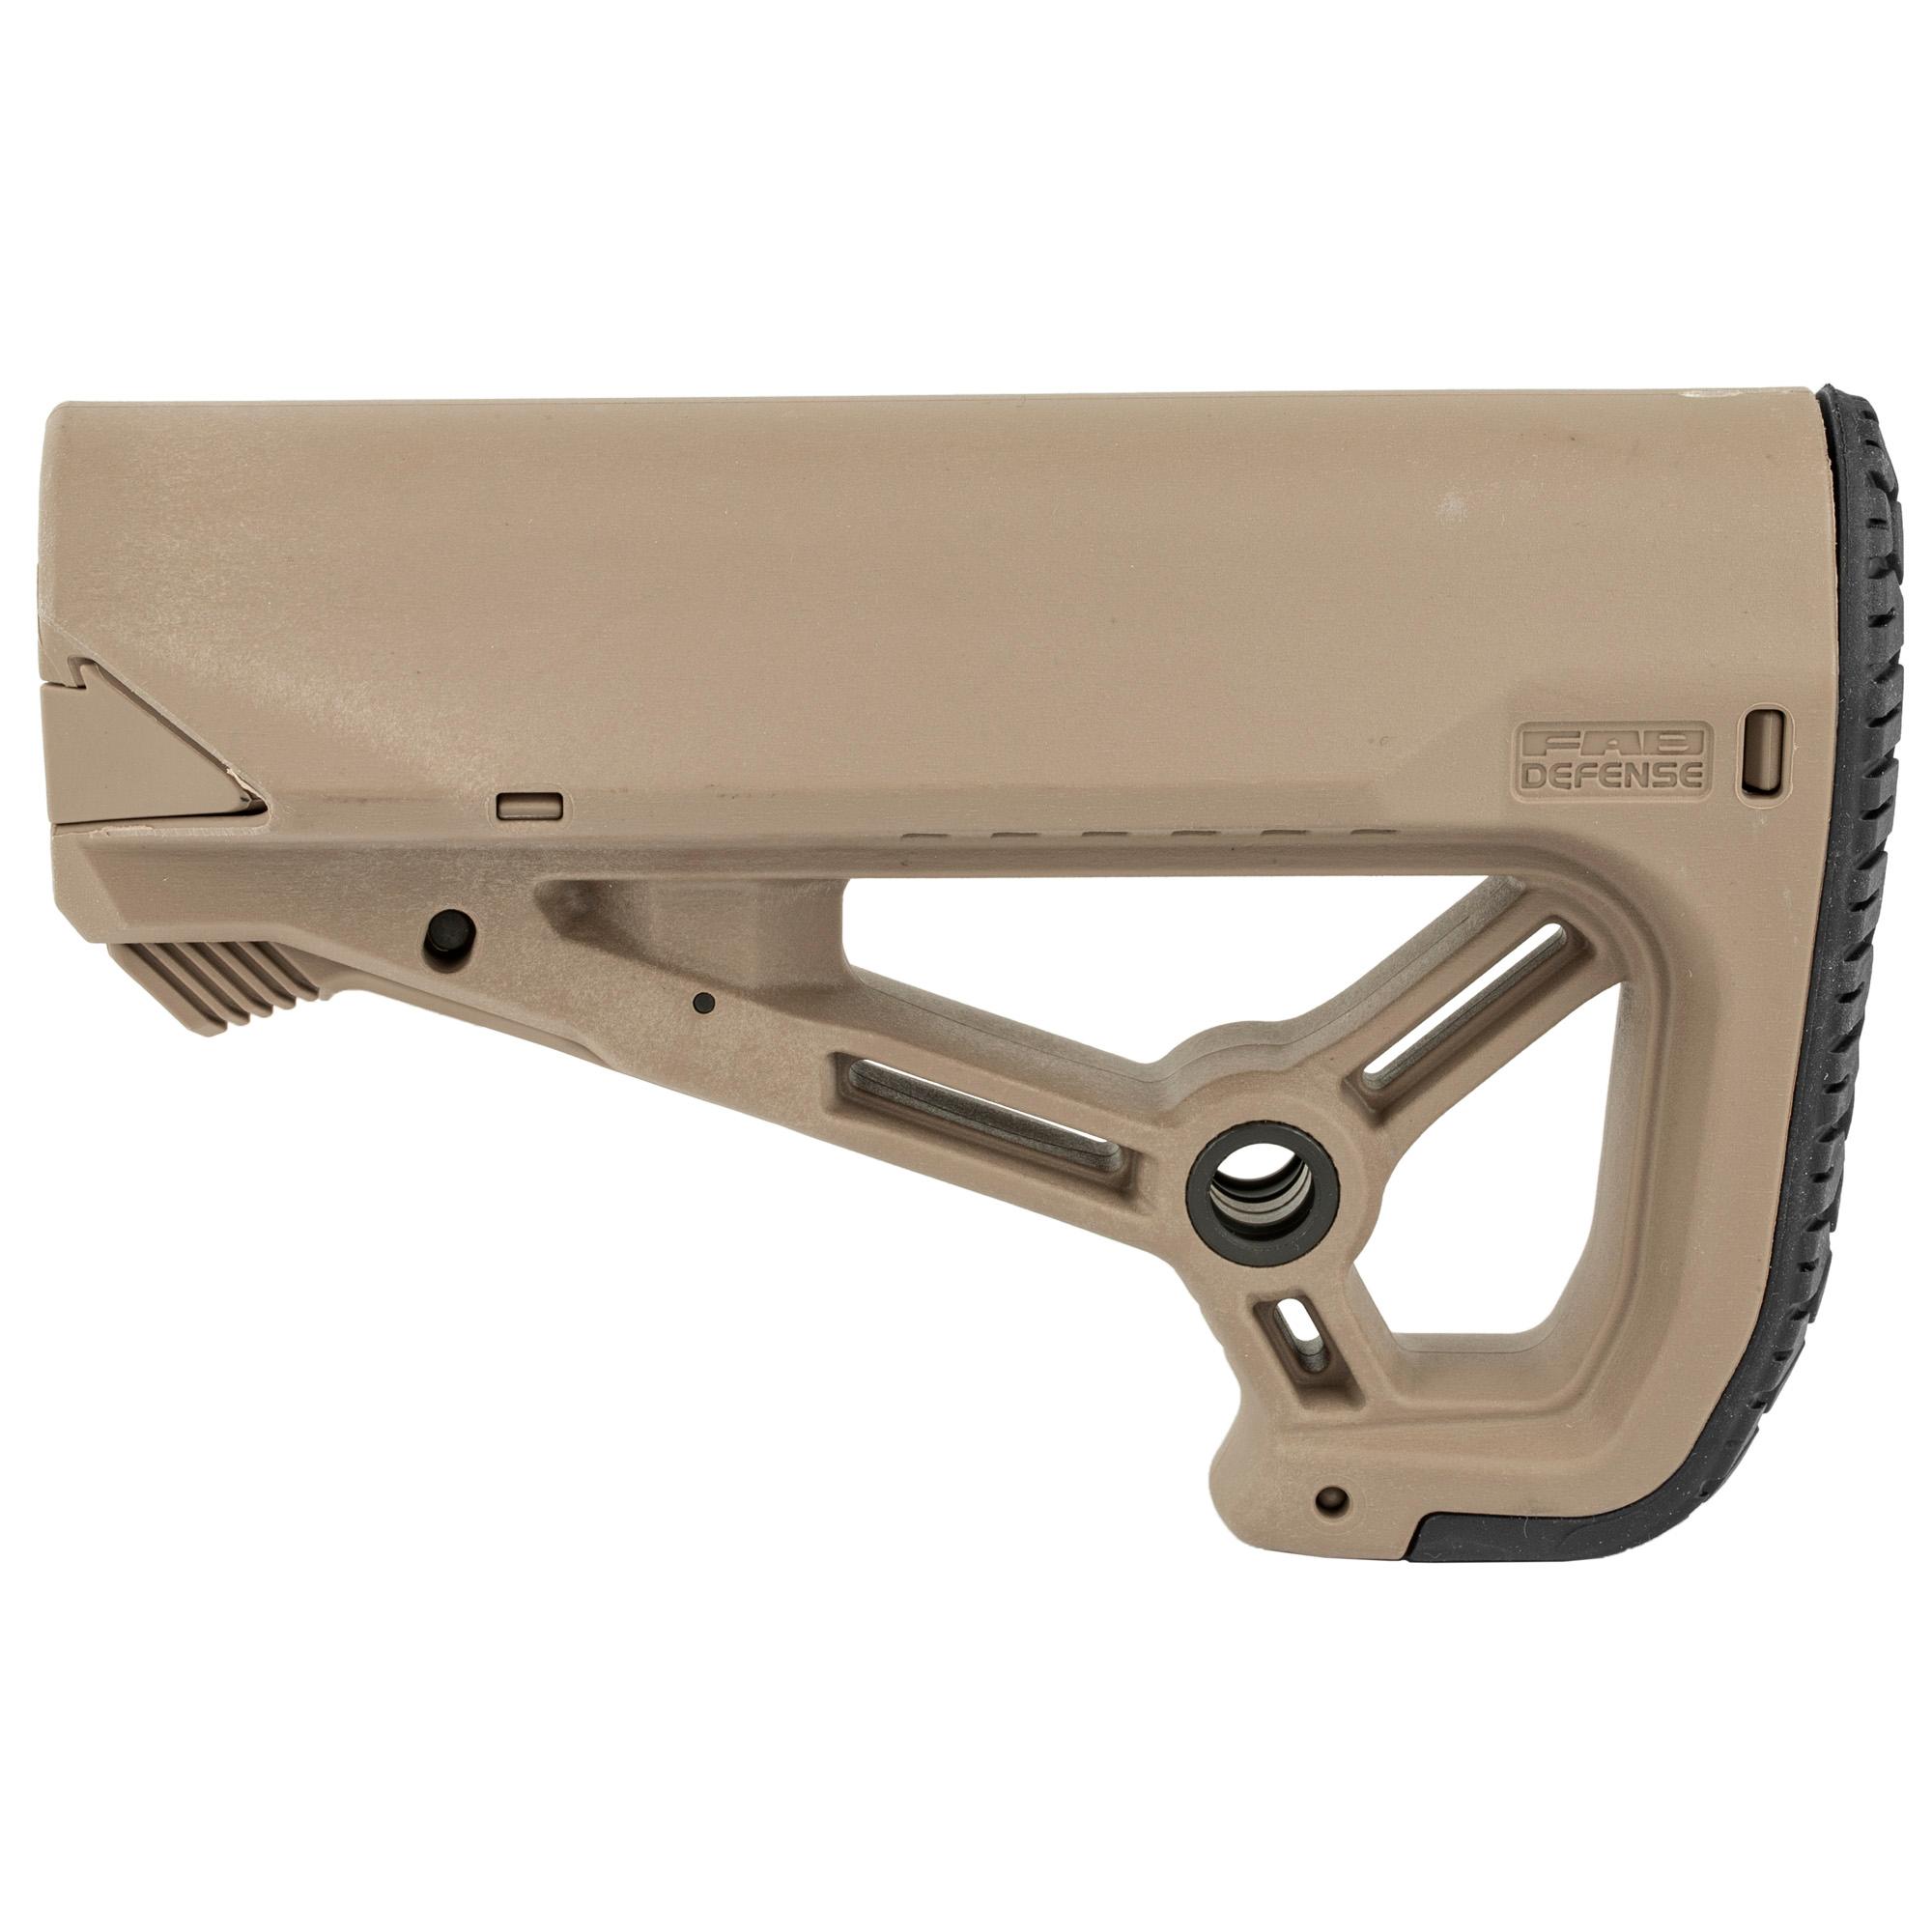 Gun Cleaning FAB DEF AR15/M4 COMPACT STOCK FDE image 1